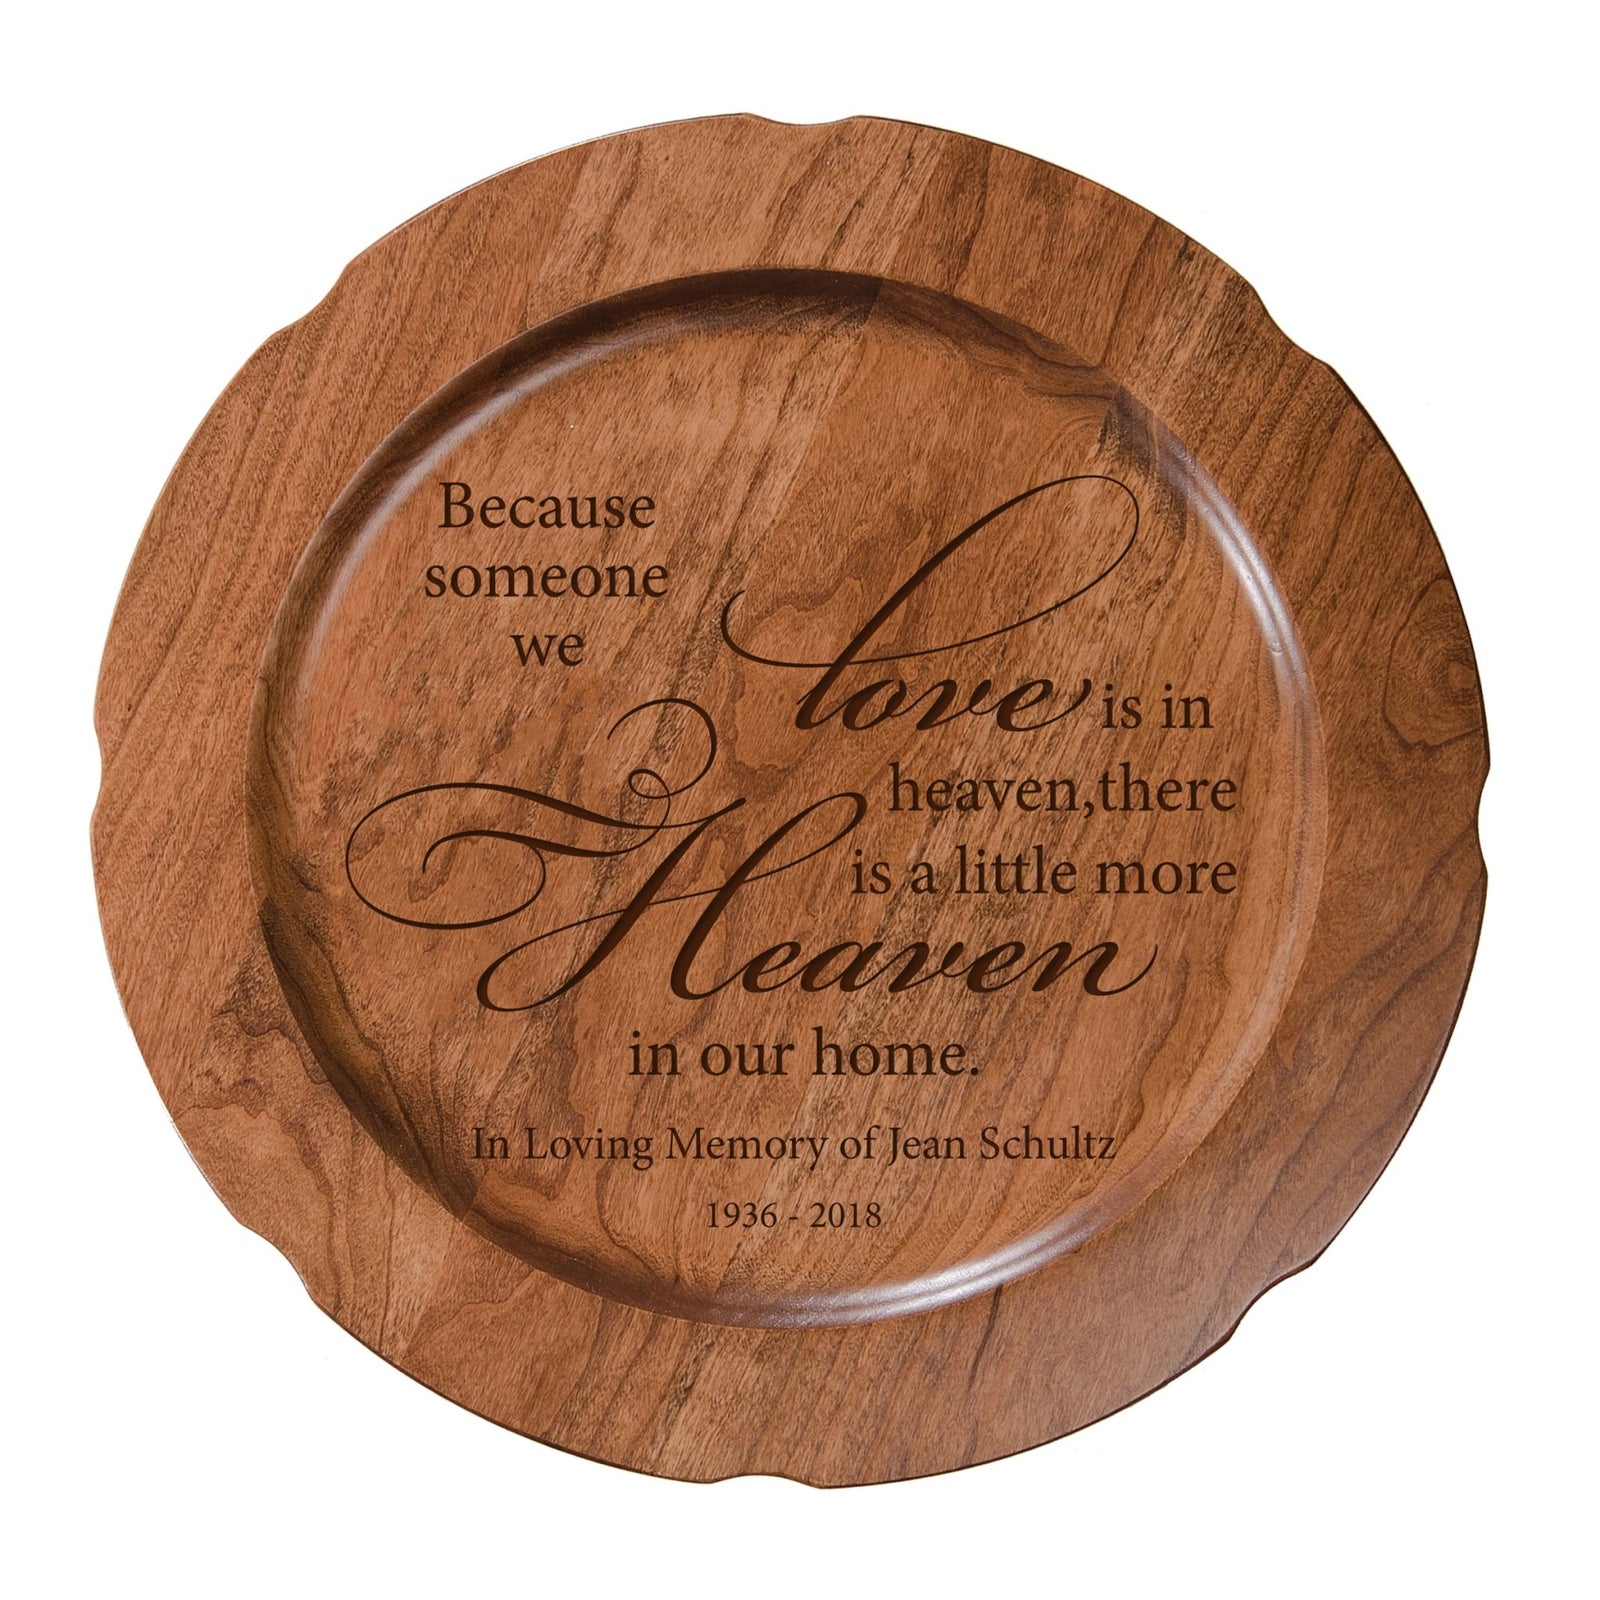 12" Personalized Memorial Wooden Plate - Someone We Love - LifeSong Milestones